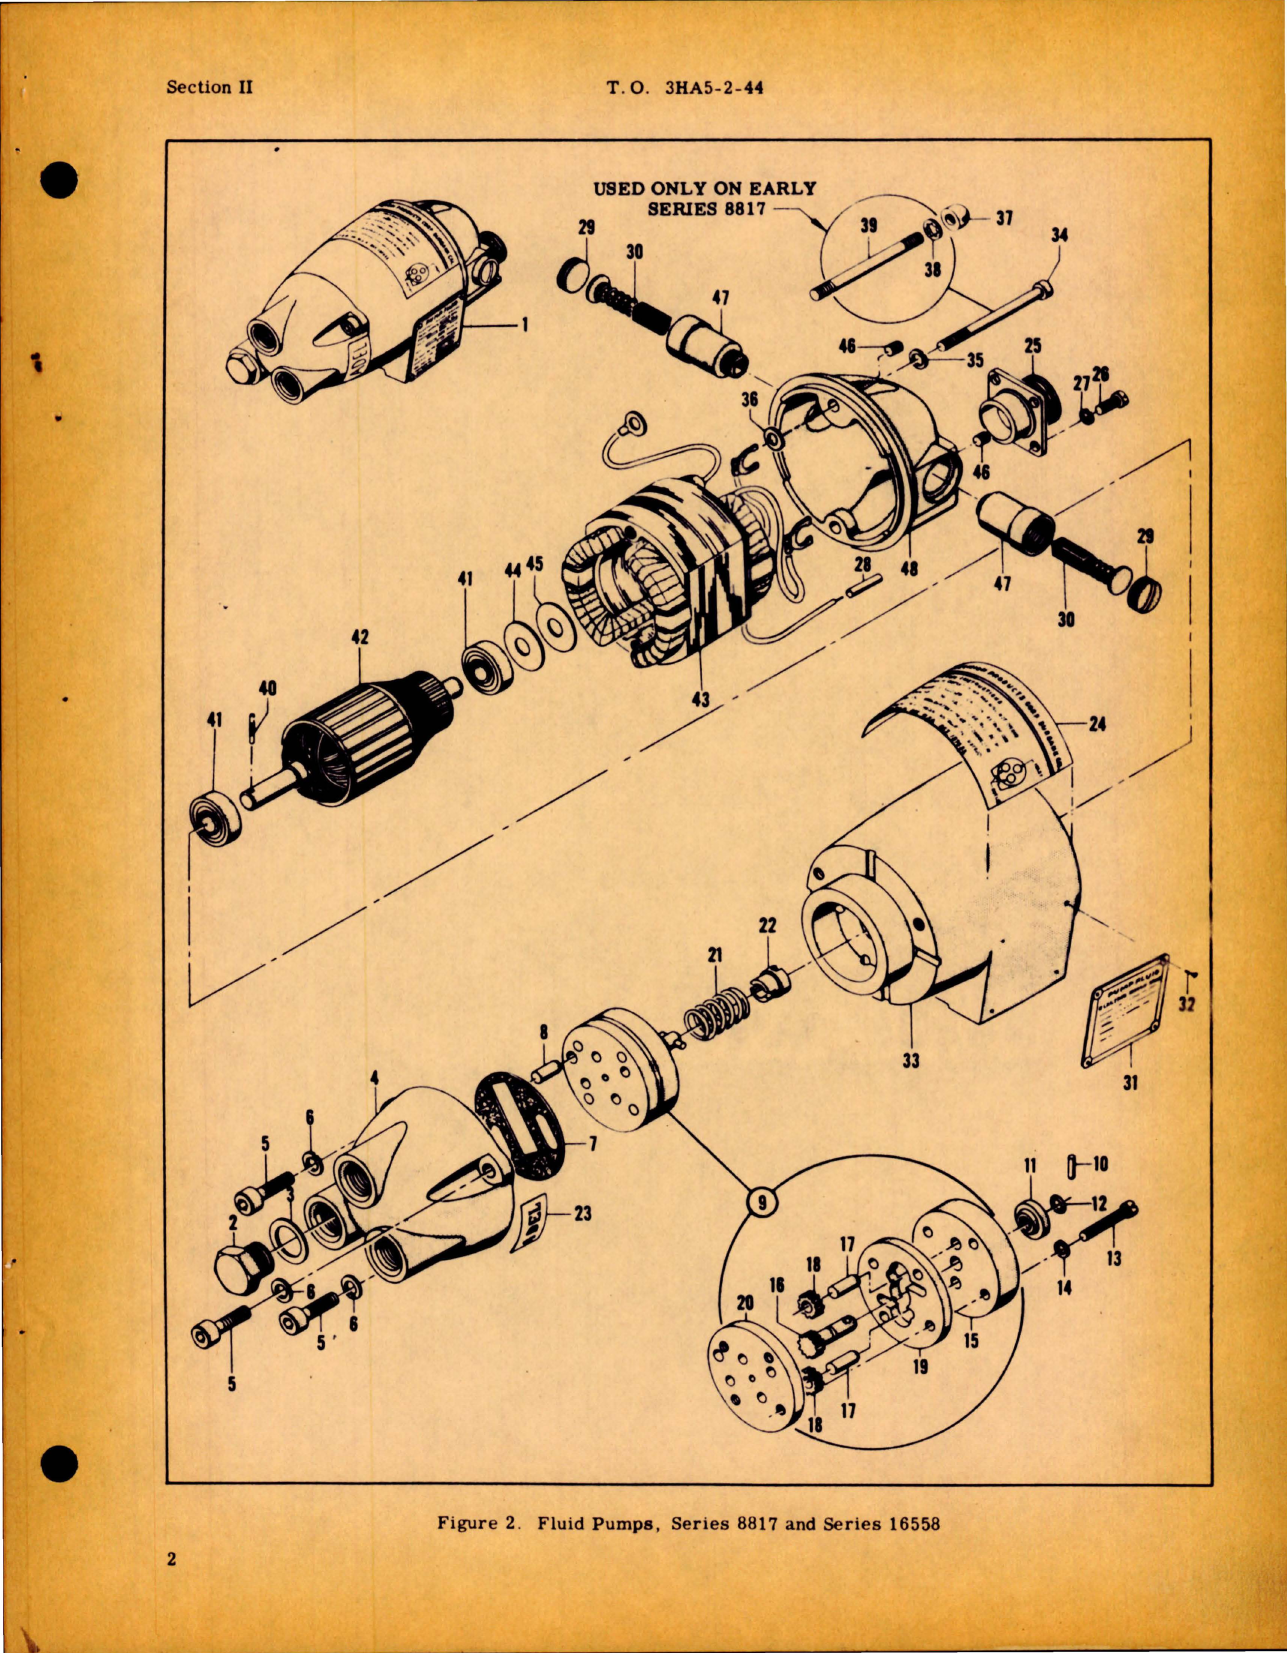 Sample page 7 from AirCorps Library document: Illustrated Parts Breakdown for Electrically Driven Fluid Pumps